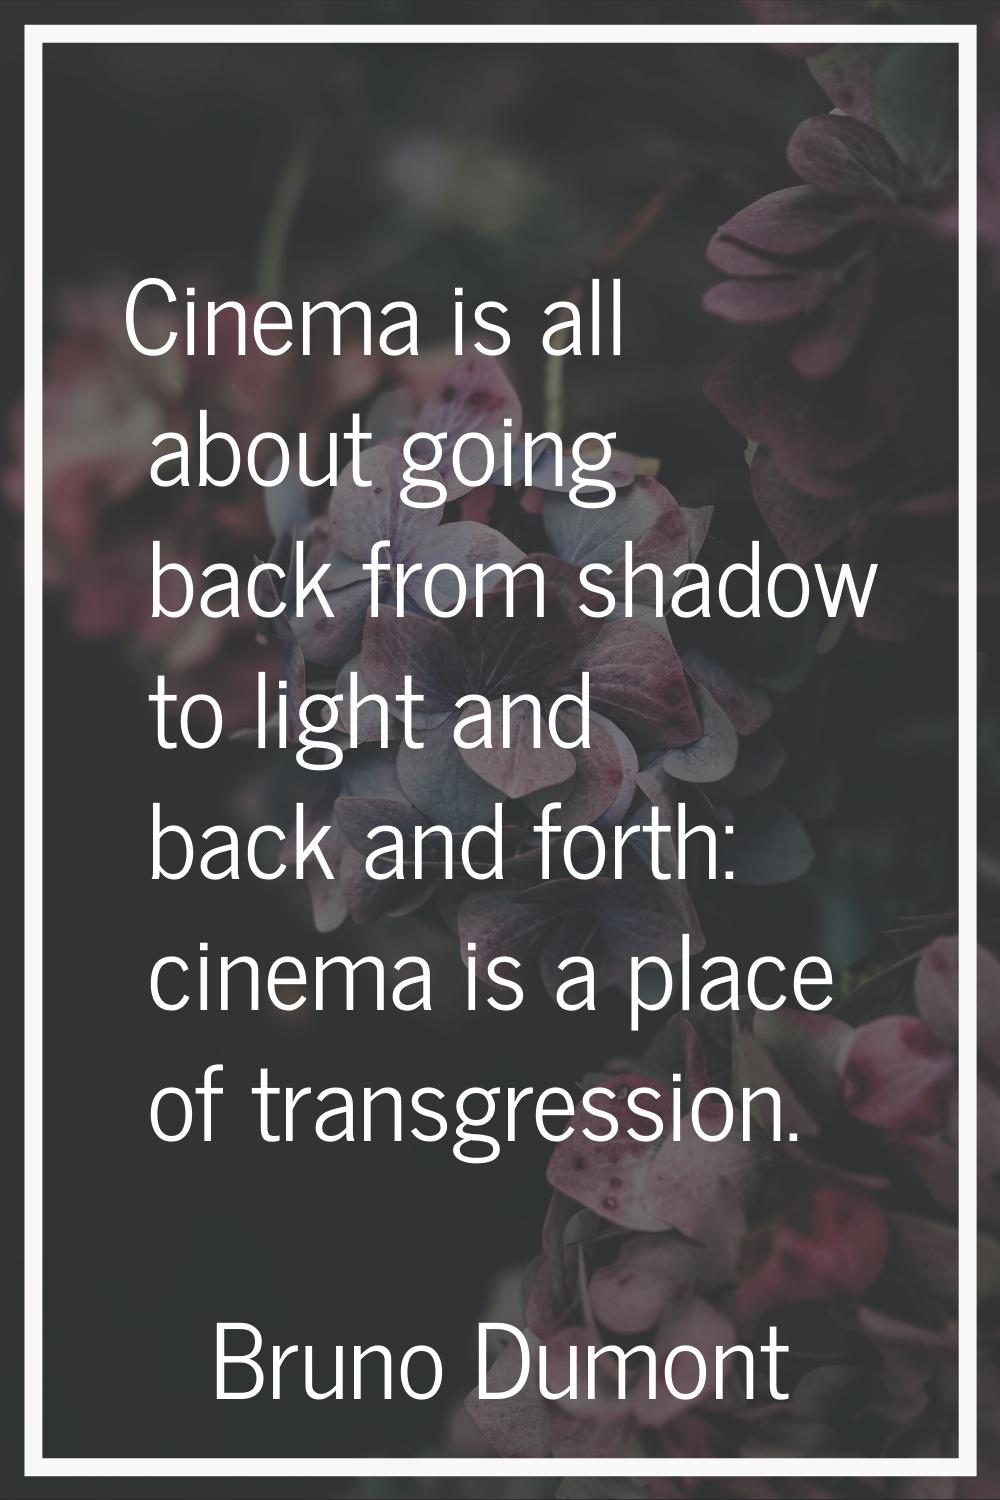 Cinema is all about going back from shadow to light and back and forth: cinema is a place of transg